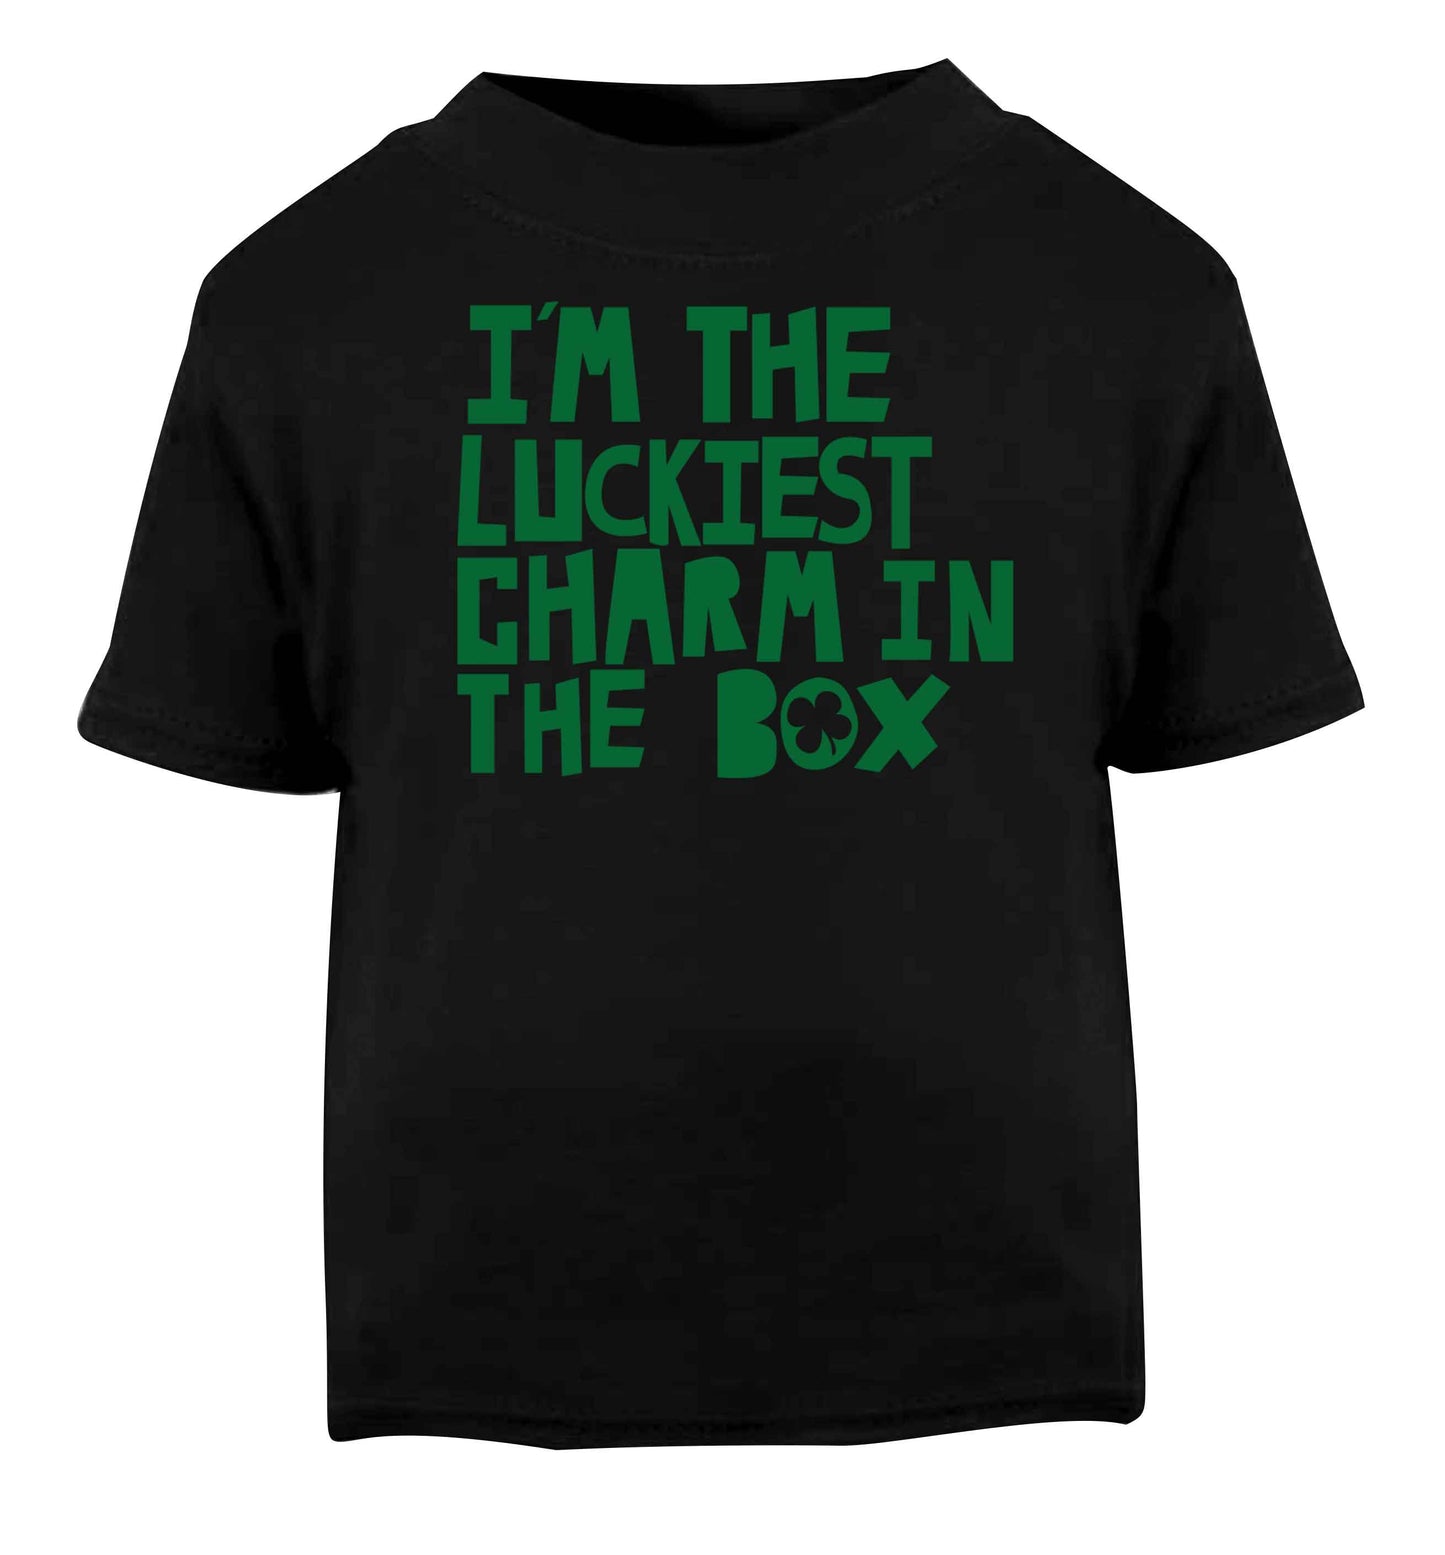 I'm the luckiest charm in the box Black baby toddler Tshirt 2 years